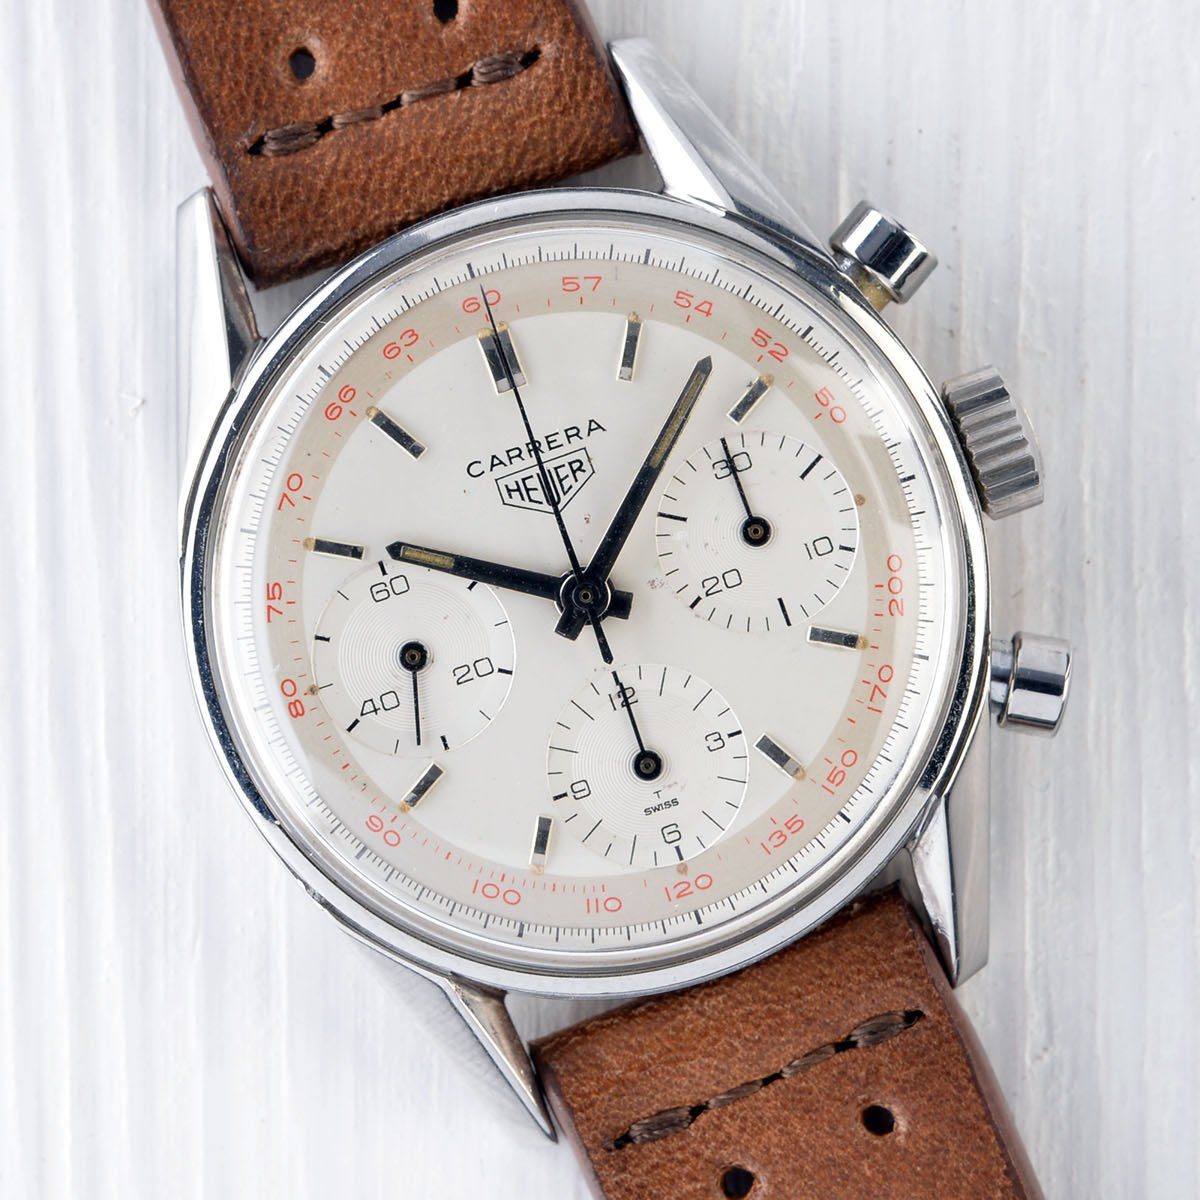 HEUER CARRERA 2447 T FIRST EXECUTION RED TACHY